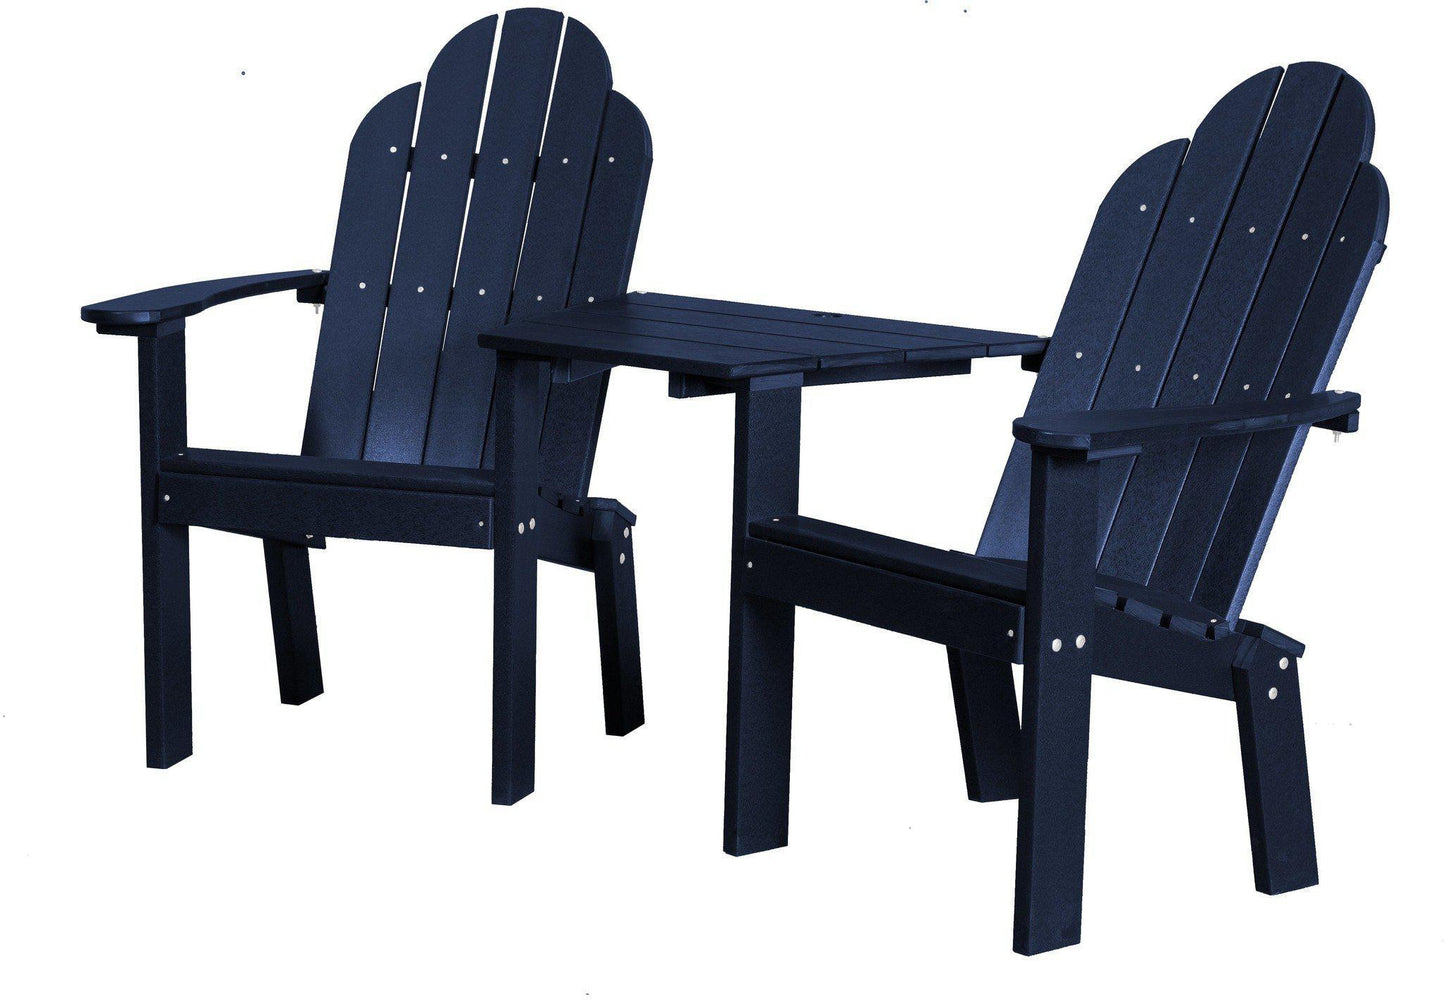 Wildridge Outdoor Recycled Plastic Classic Deck Chair Tete a Tete - LEAD TIME TO SHIP 4 WEEKS